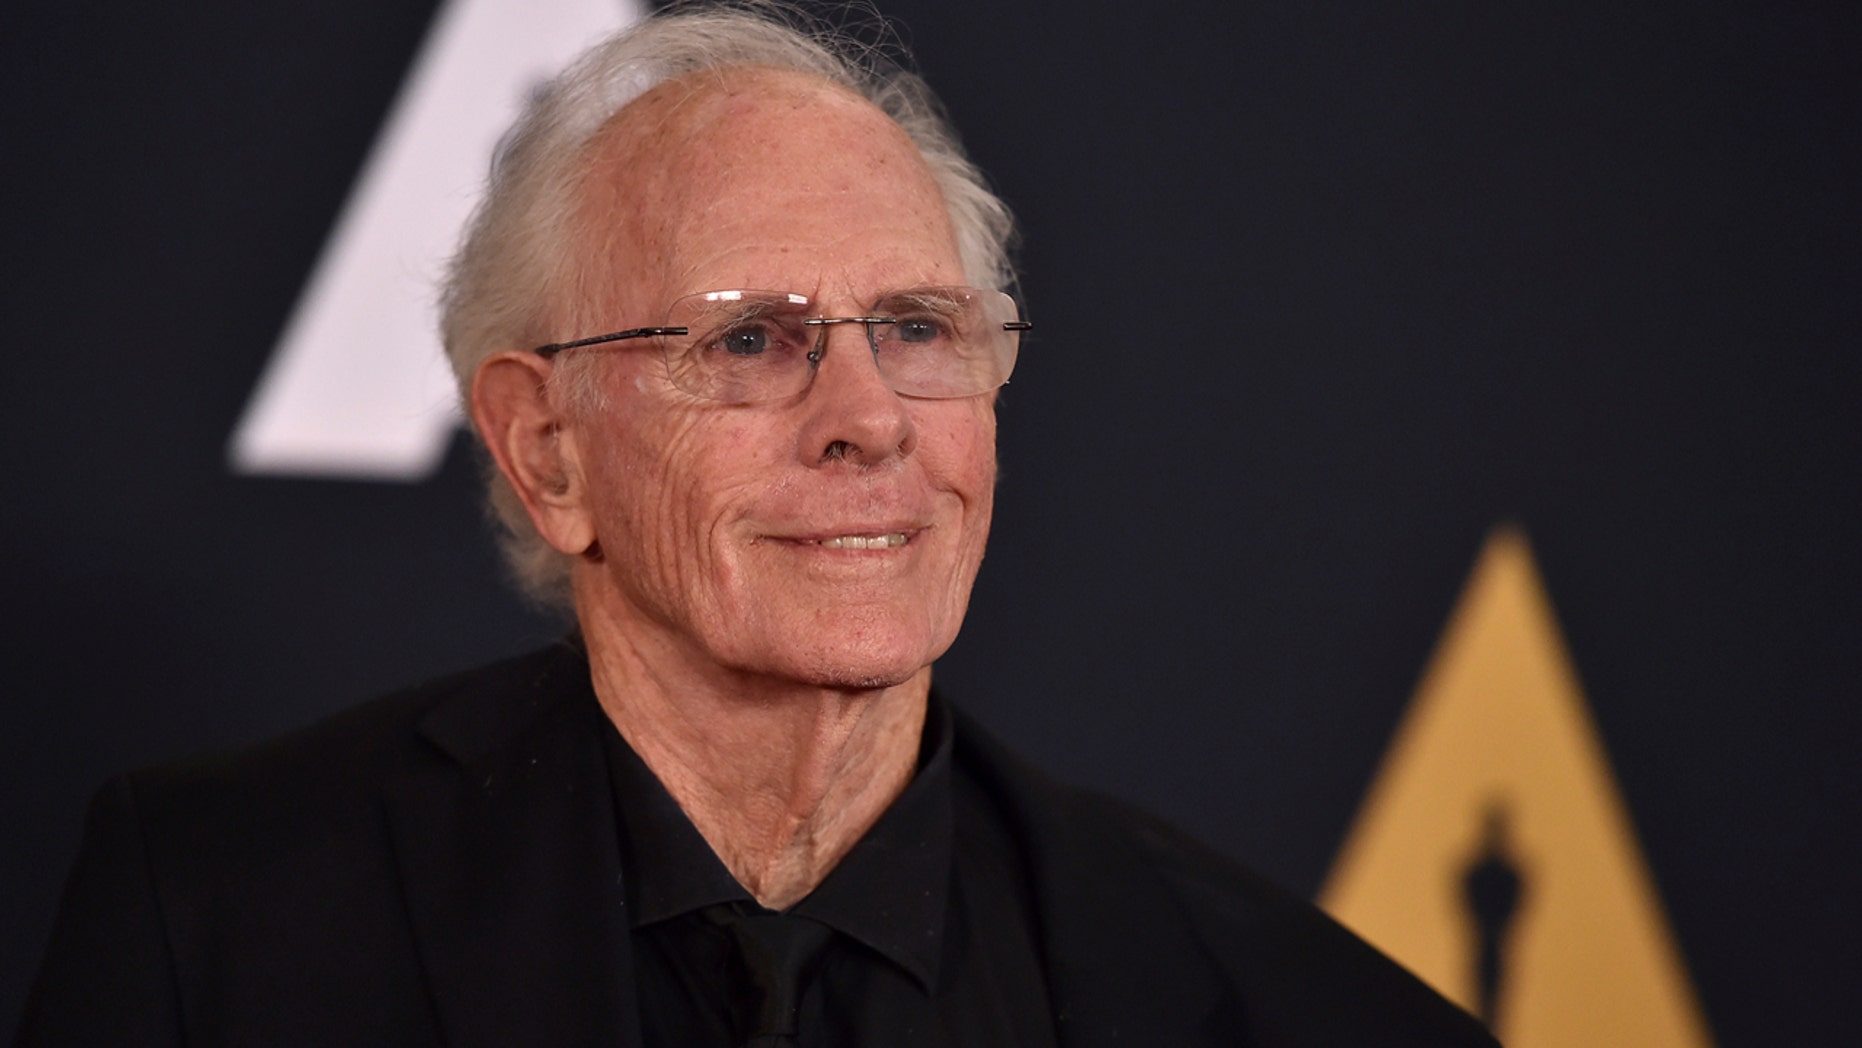 Bruce Dern arrives at the 2016 Governors Awards in Los Angeles. Dern was released from hospital after a fall during his daily jog in Los Angeles.